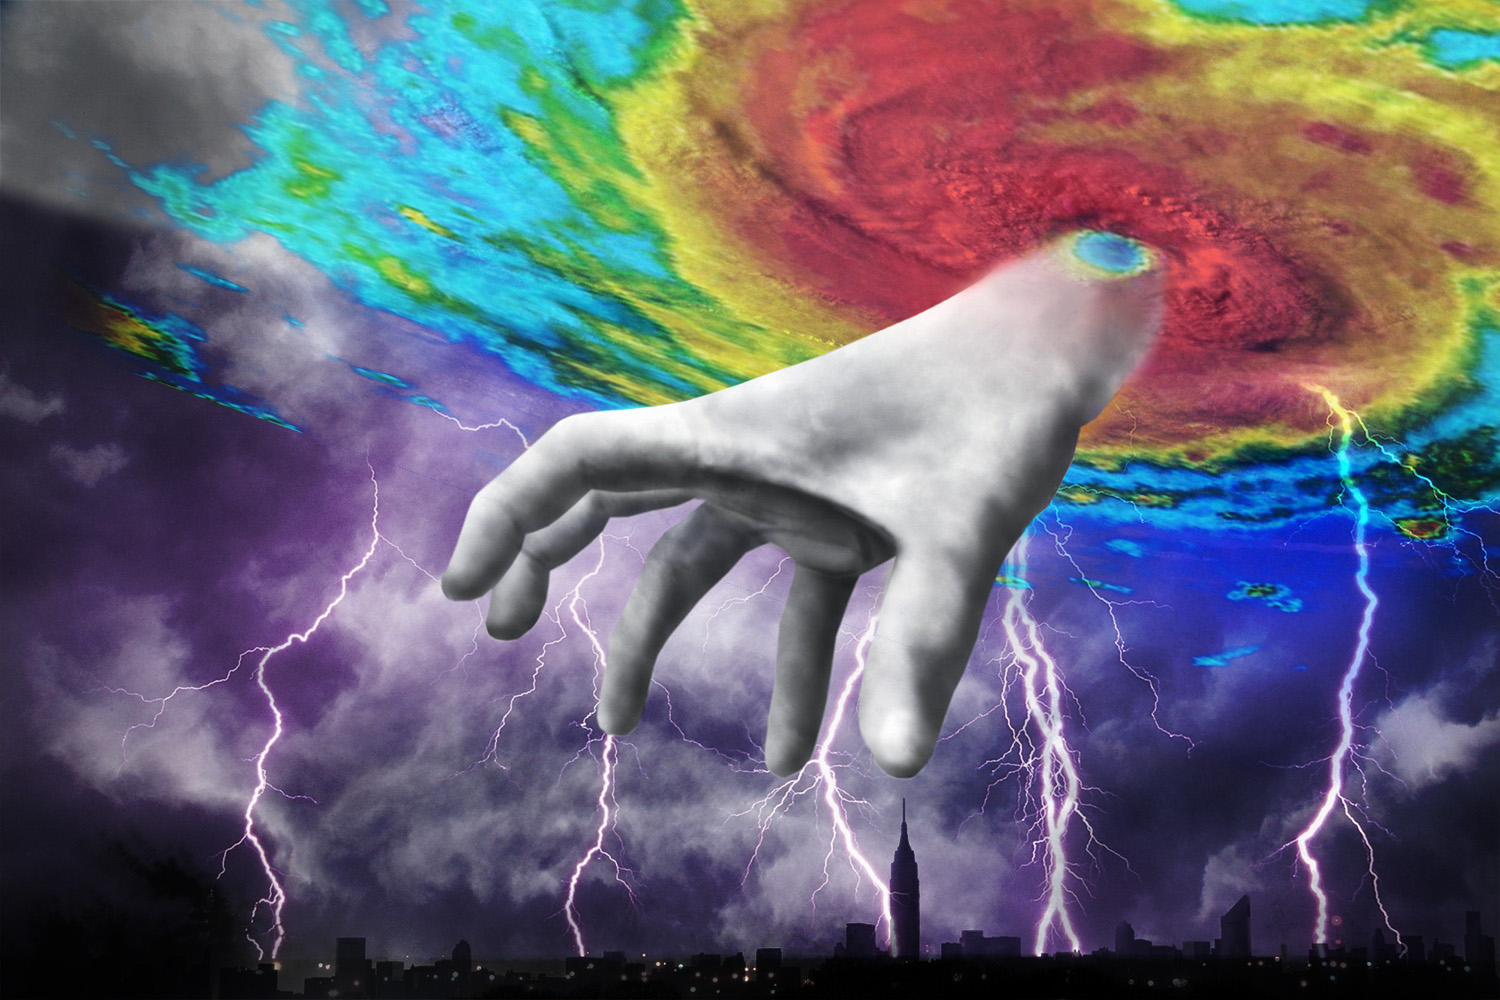 Is God Punishing the World with Natural Disasters?